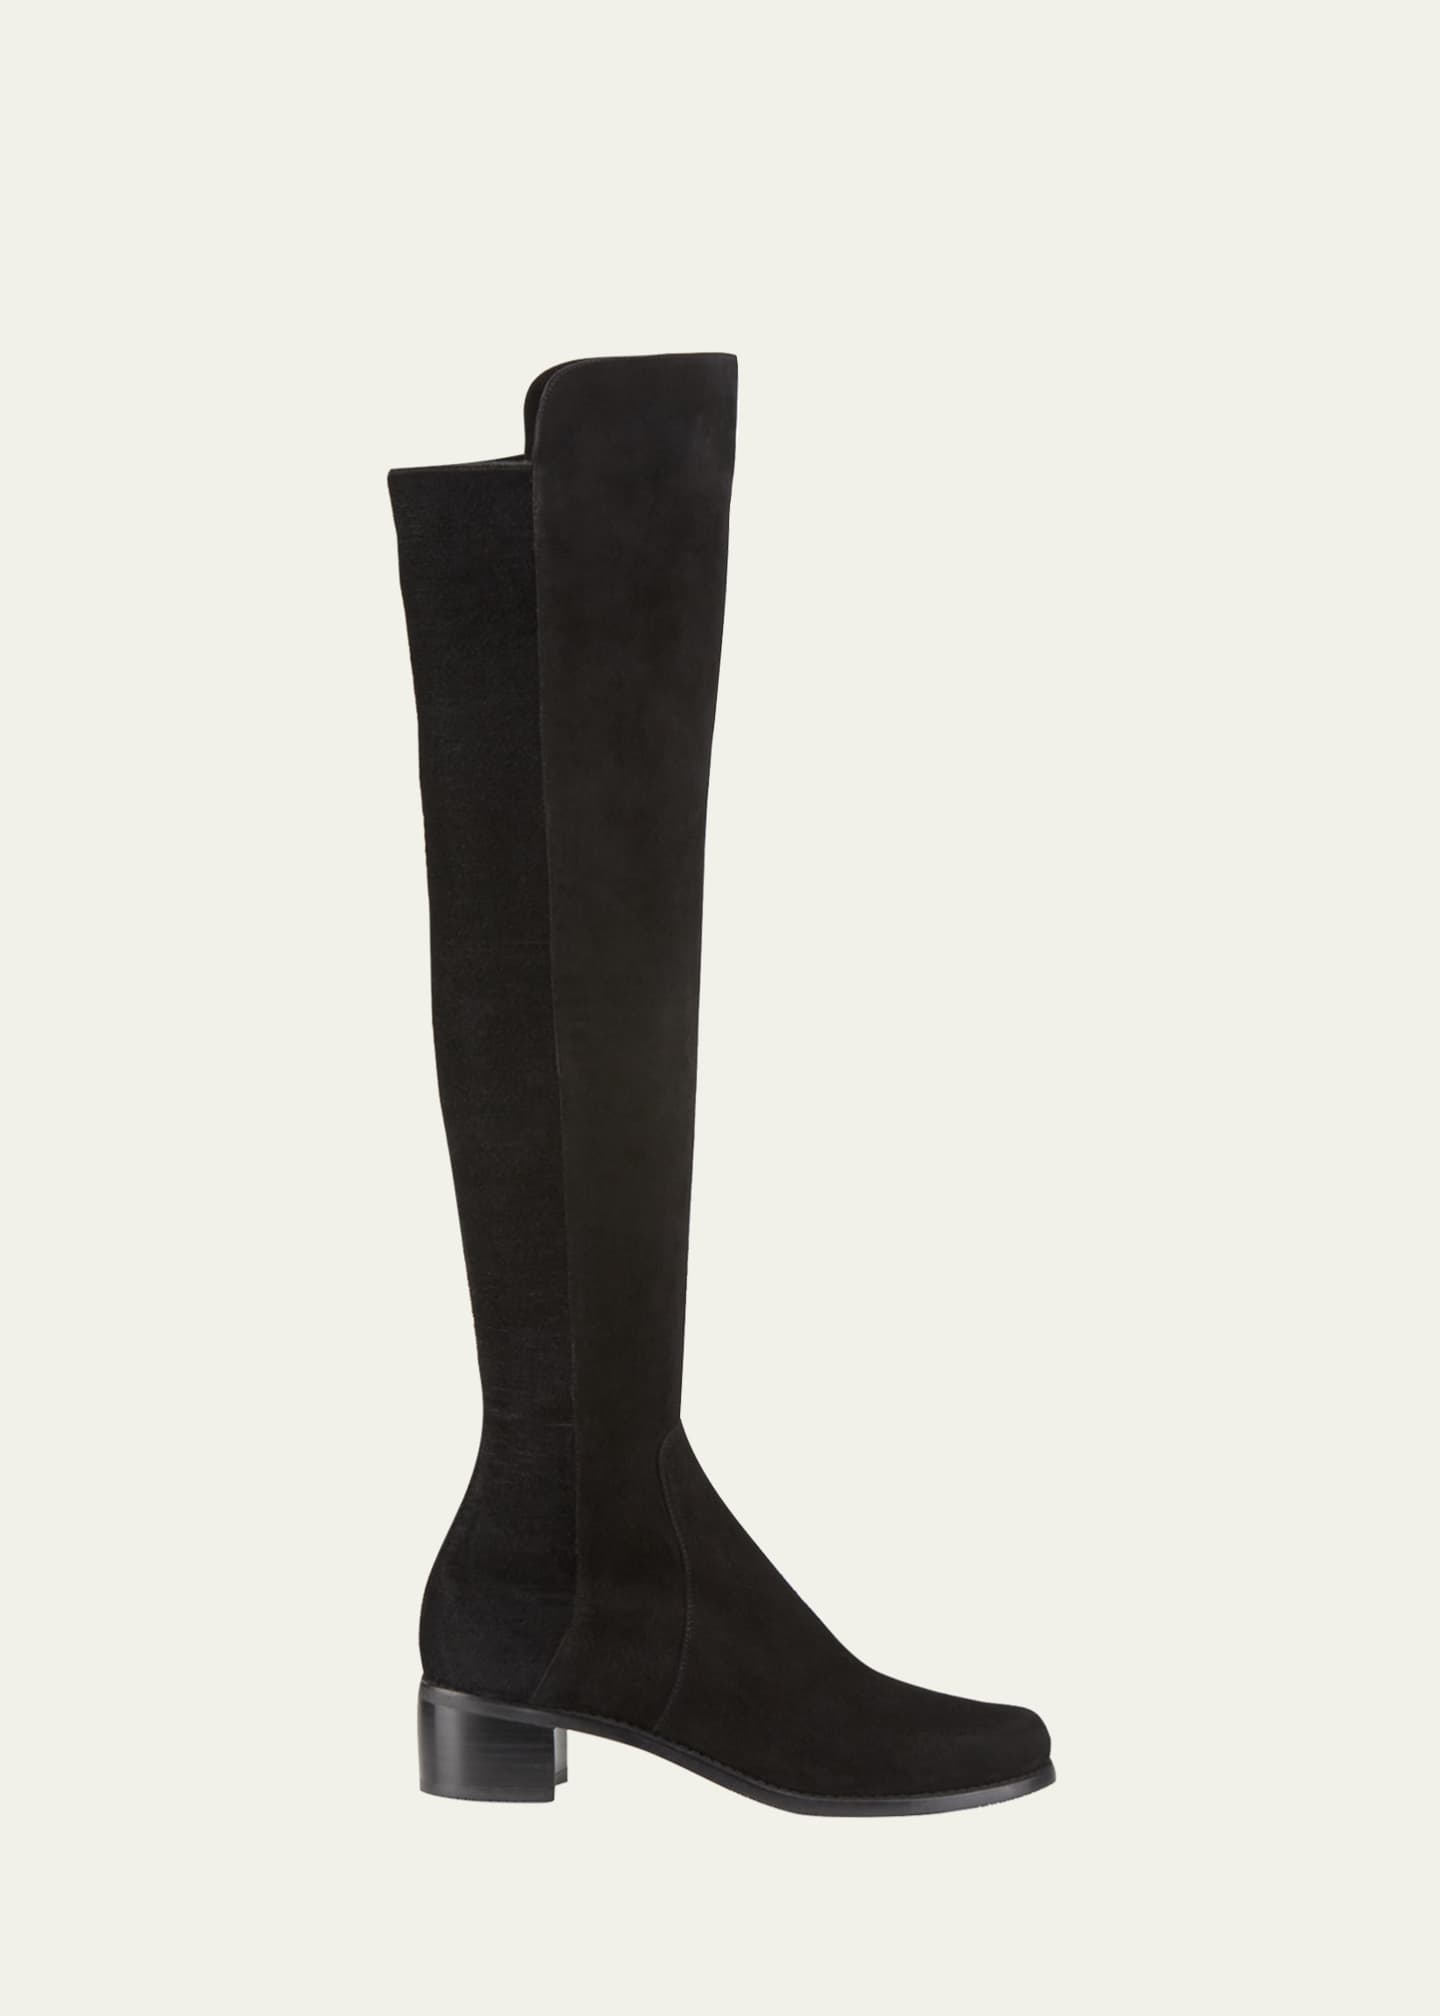 Stuart Weitzman Reserve Stretch-Suede Knee Boots Image 1 of 3